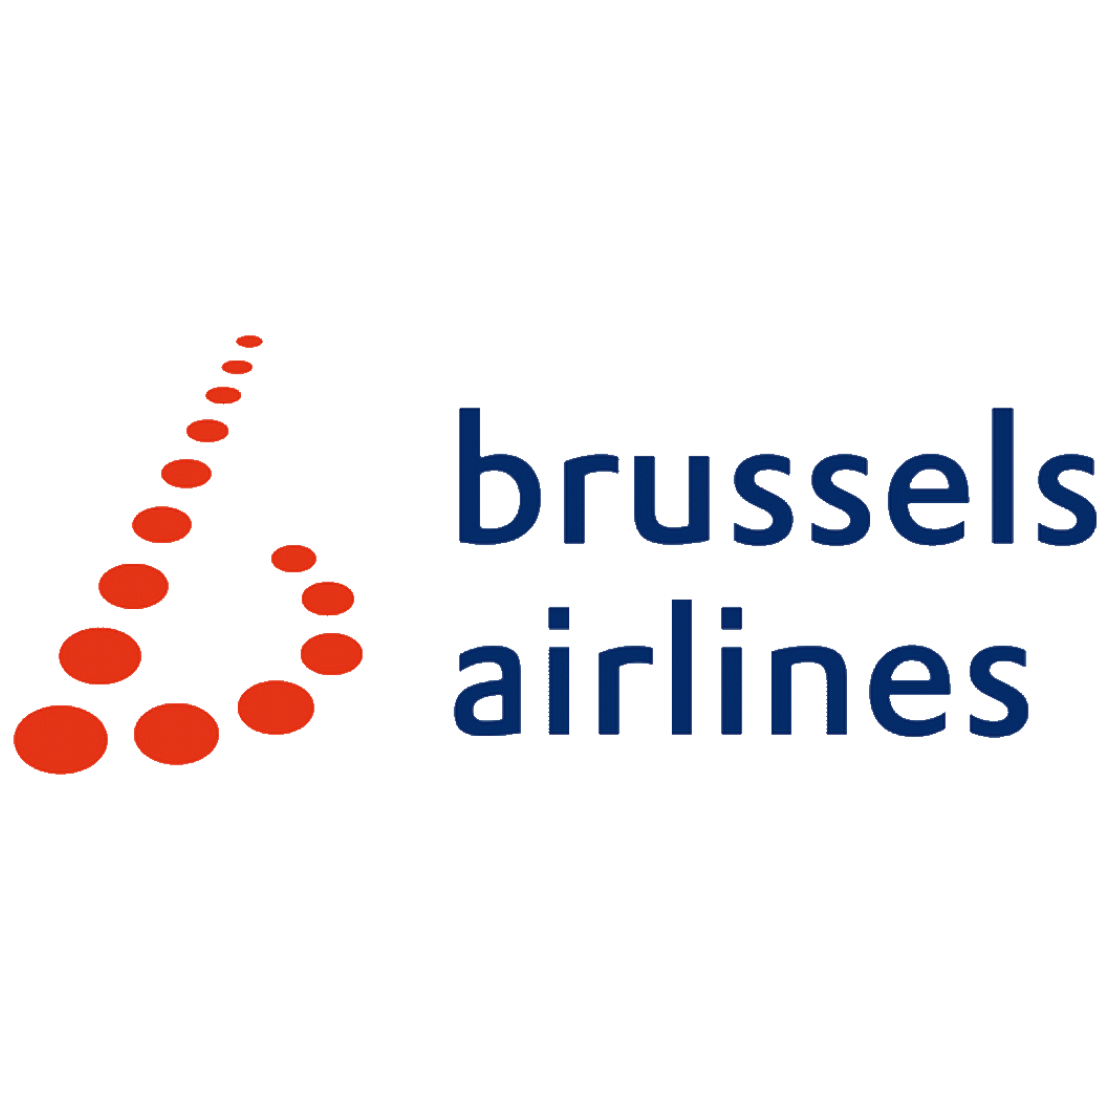 Brussels airlines.png